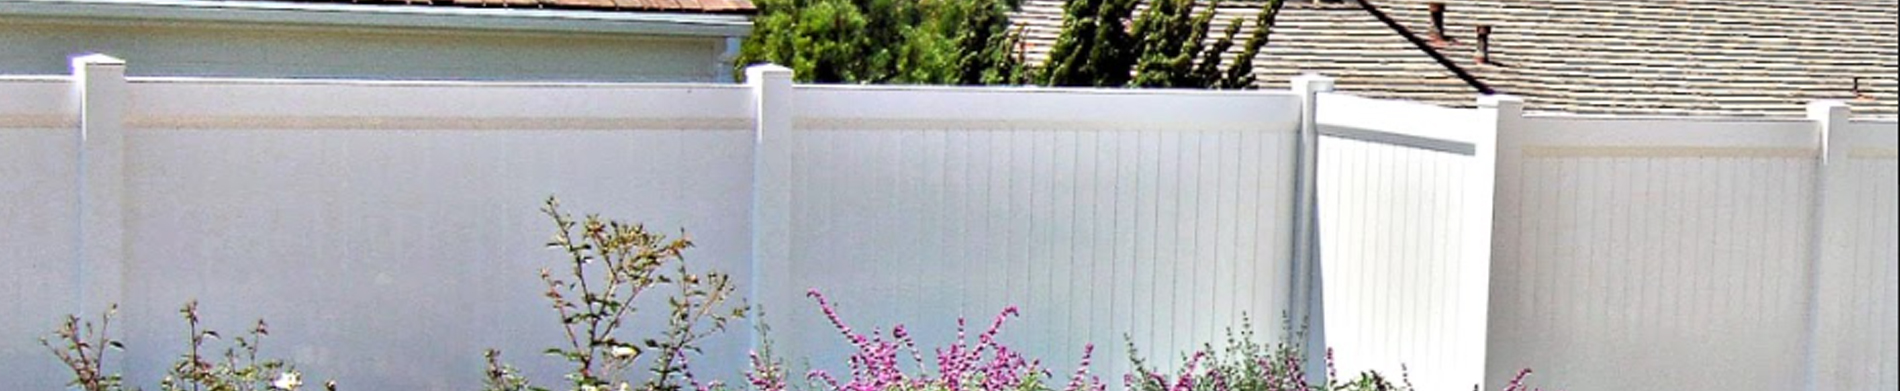 Duramax vinyl fence panel is becoming more popular in the USA – Know the reasons behind it!